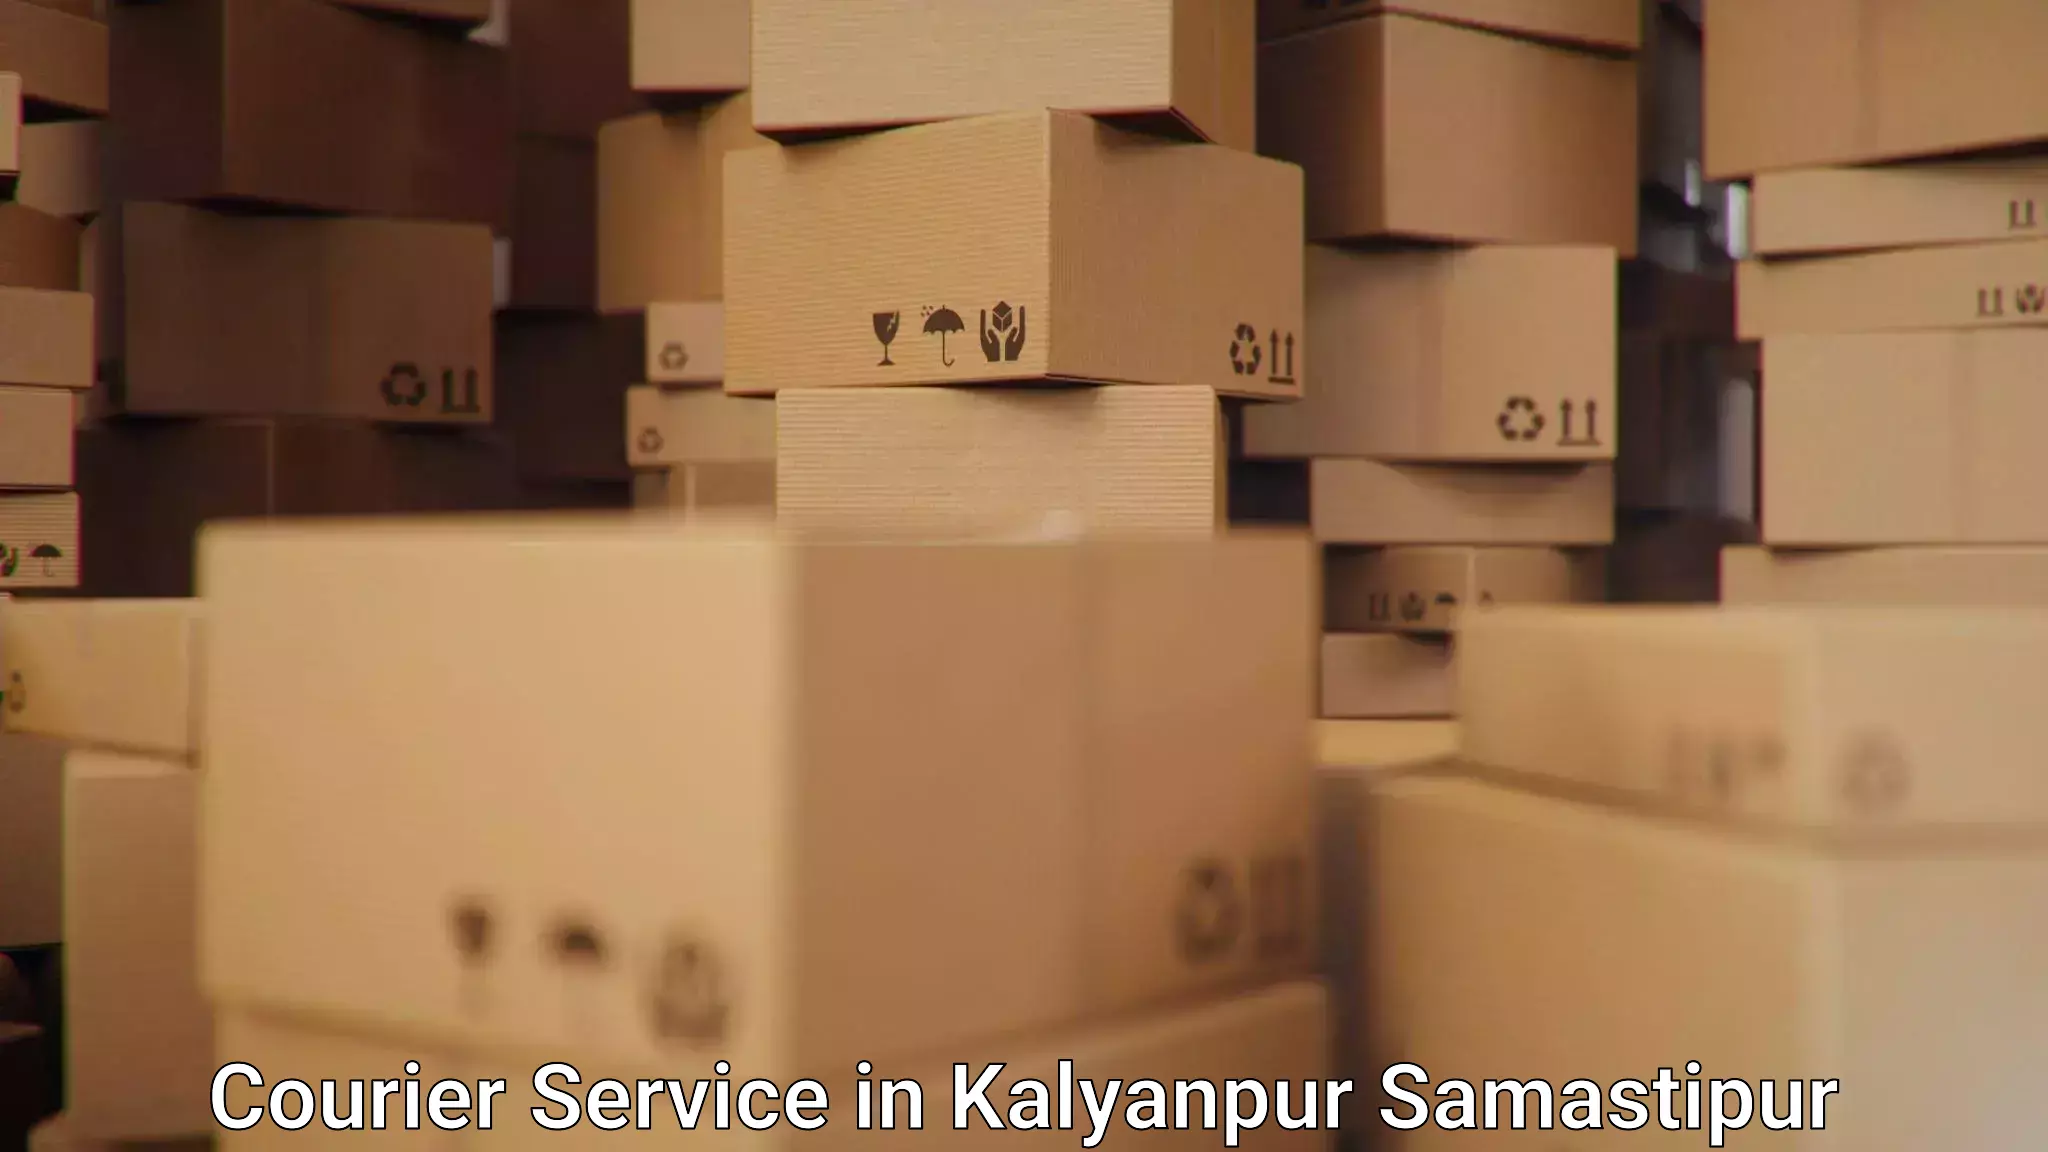 Same-day delivery solutions in Kalyanpur Samastipur